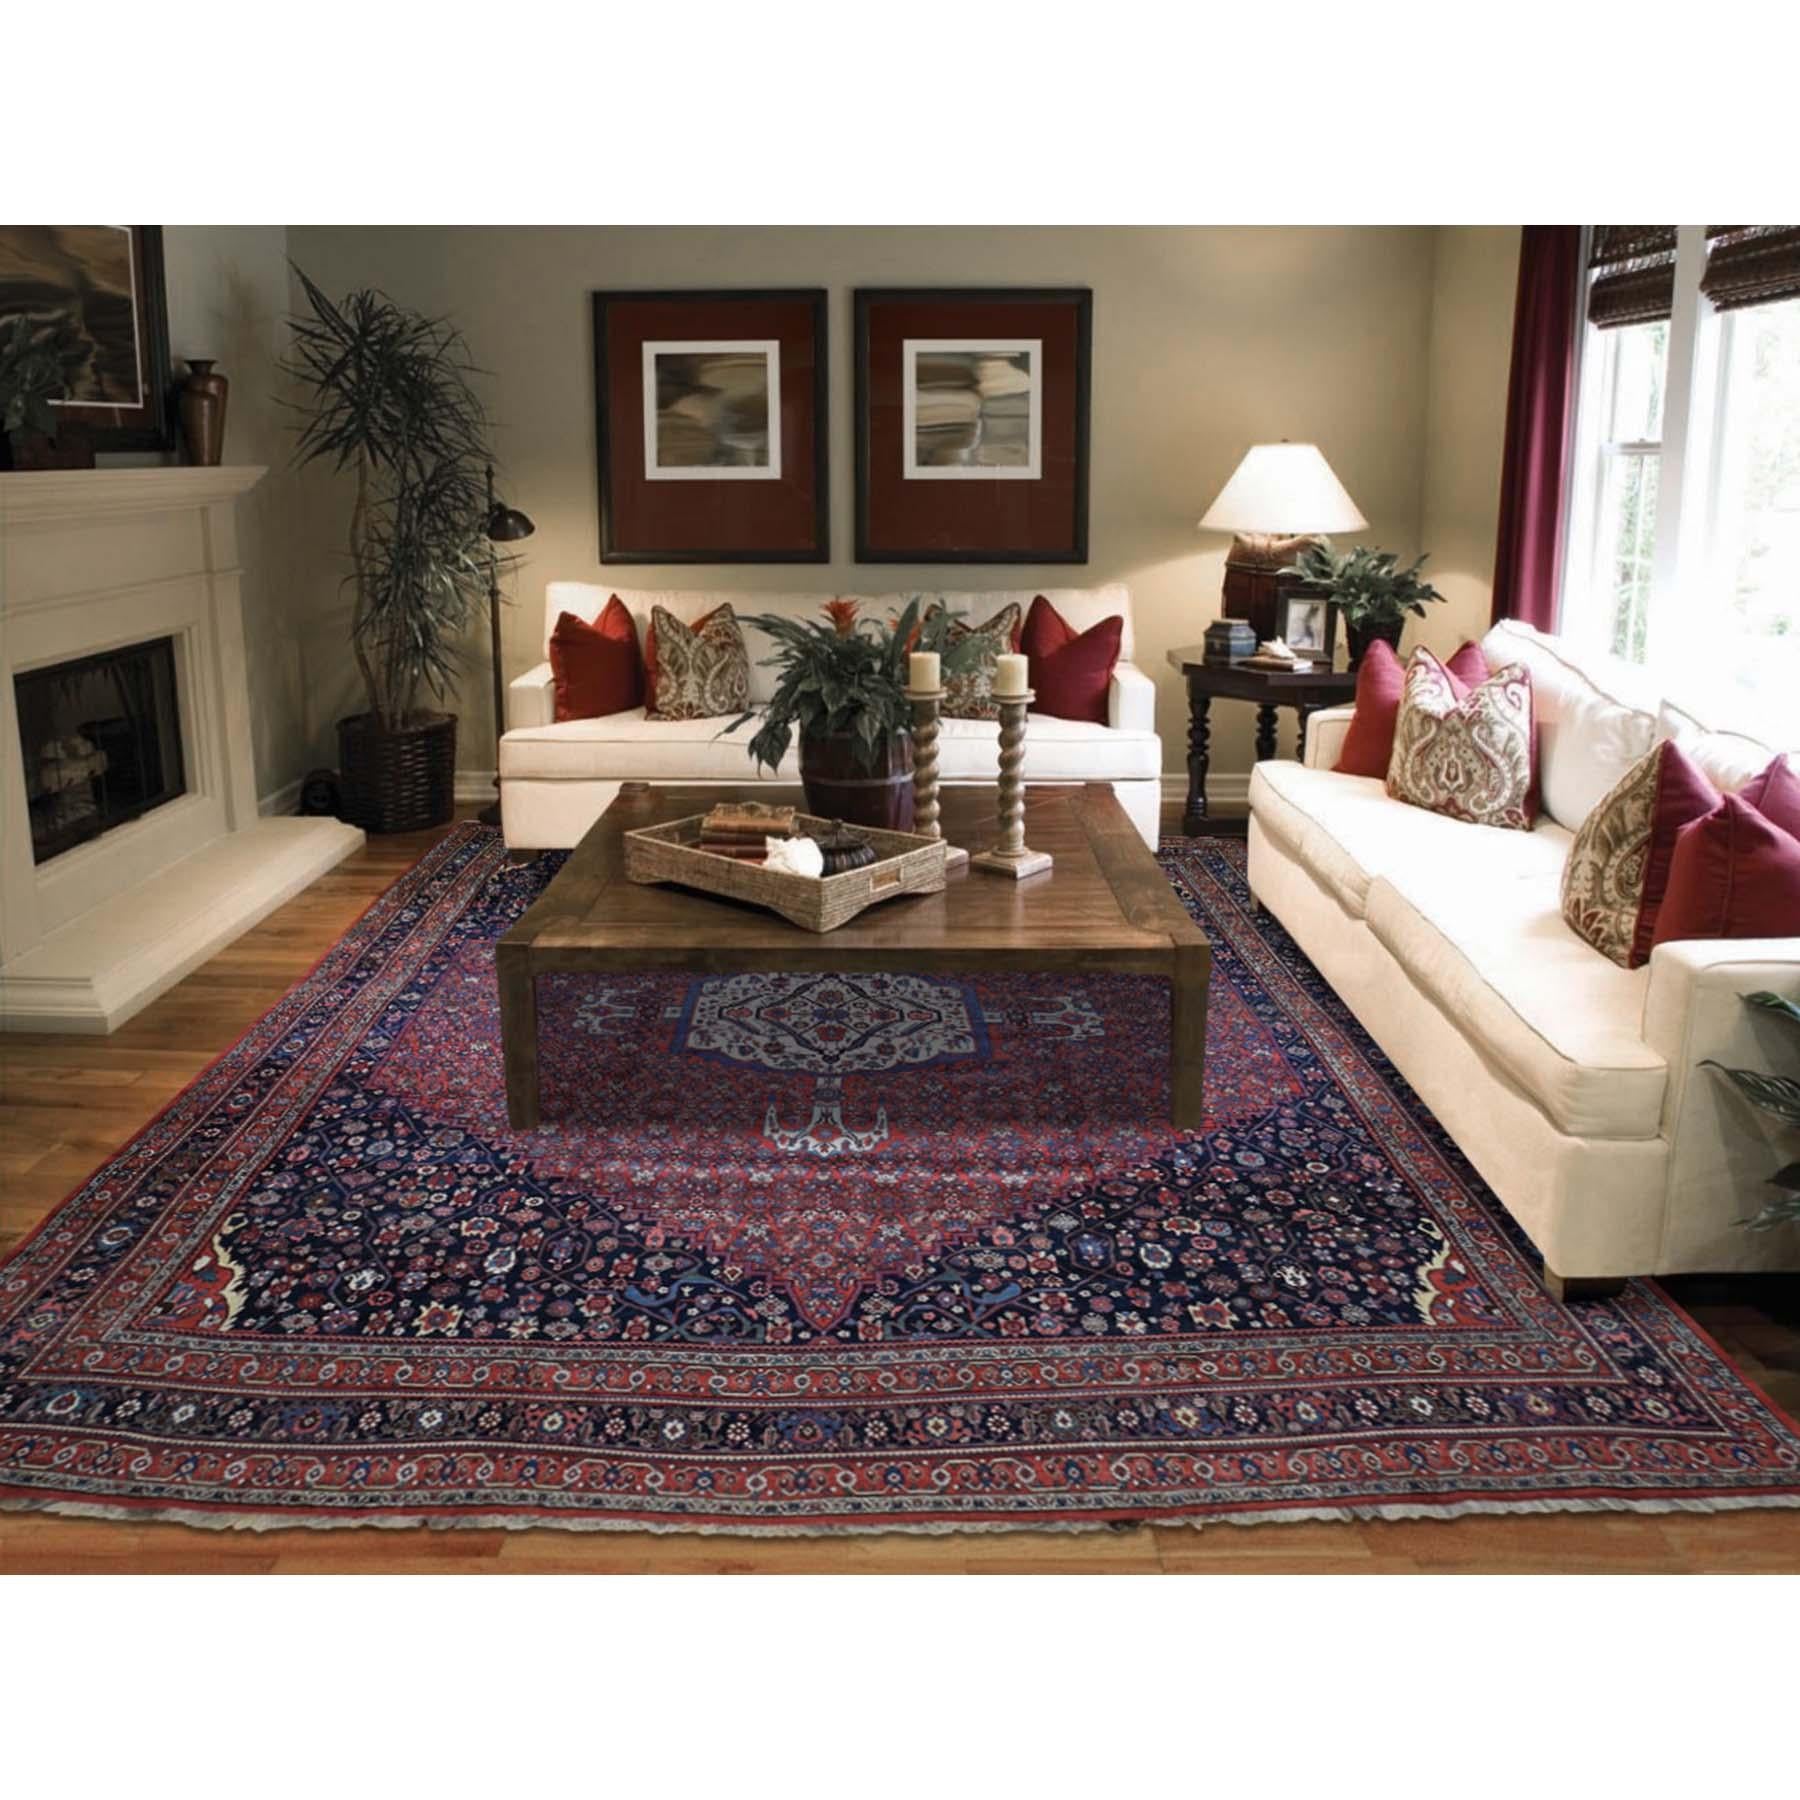 This is a truly genuine one-of-a-kind Antique Persian Bijar pure wool Exc condition wide gallery rug. It has been knotted for months and months in the centuries-old Persian weaving craftsmanship techniques by expert artisans.


Primary materials: